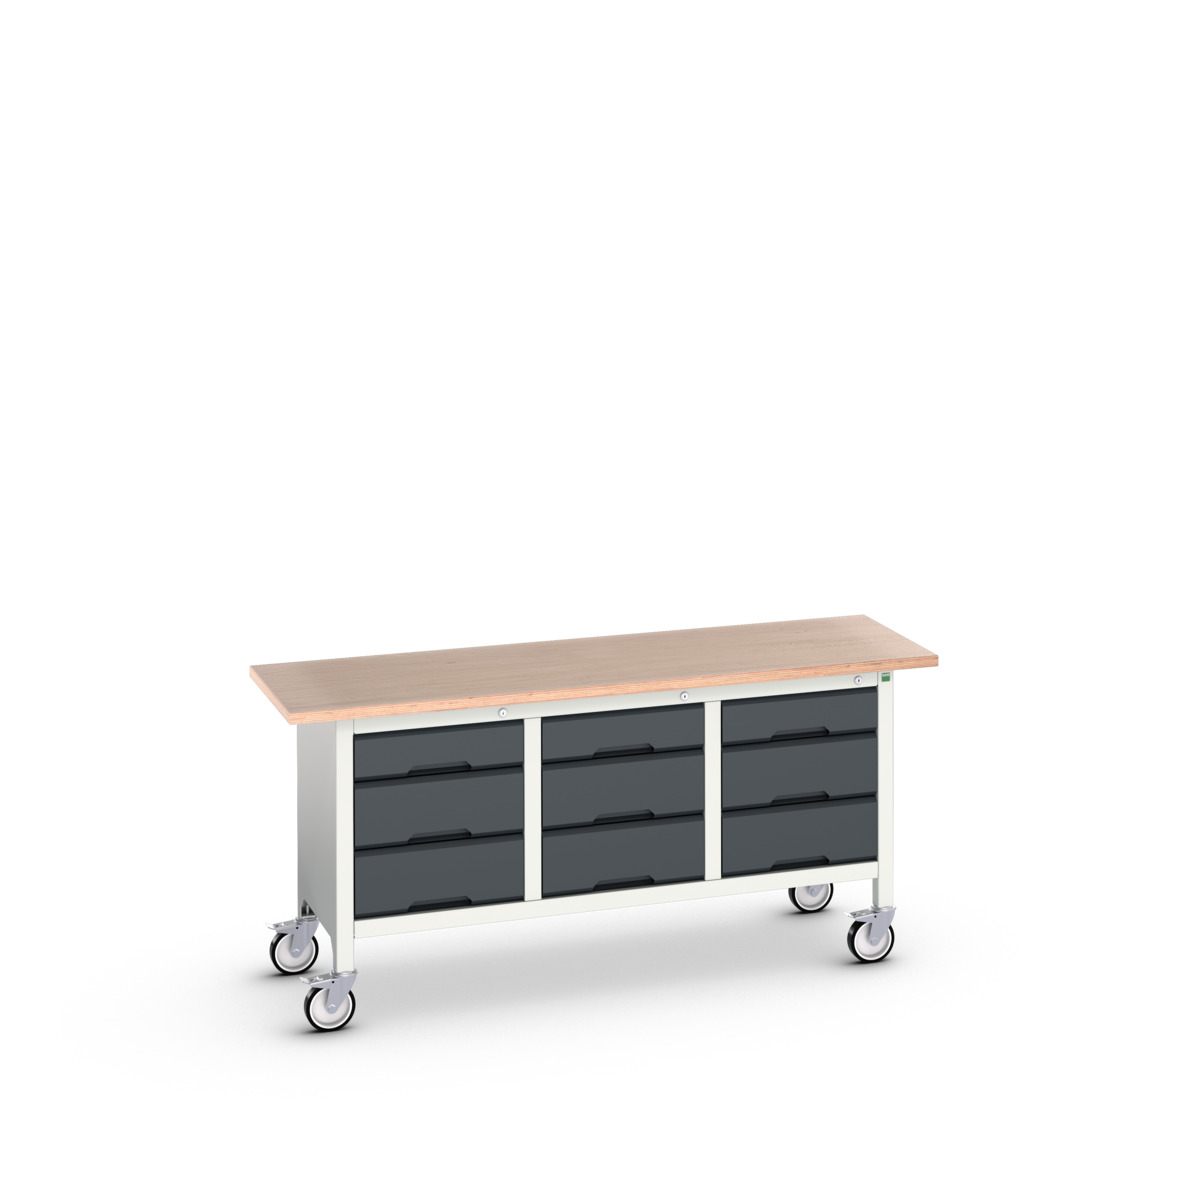 16923223.19 - verso mobile storage bench (mpx)